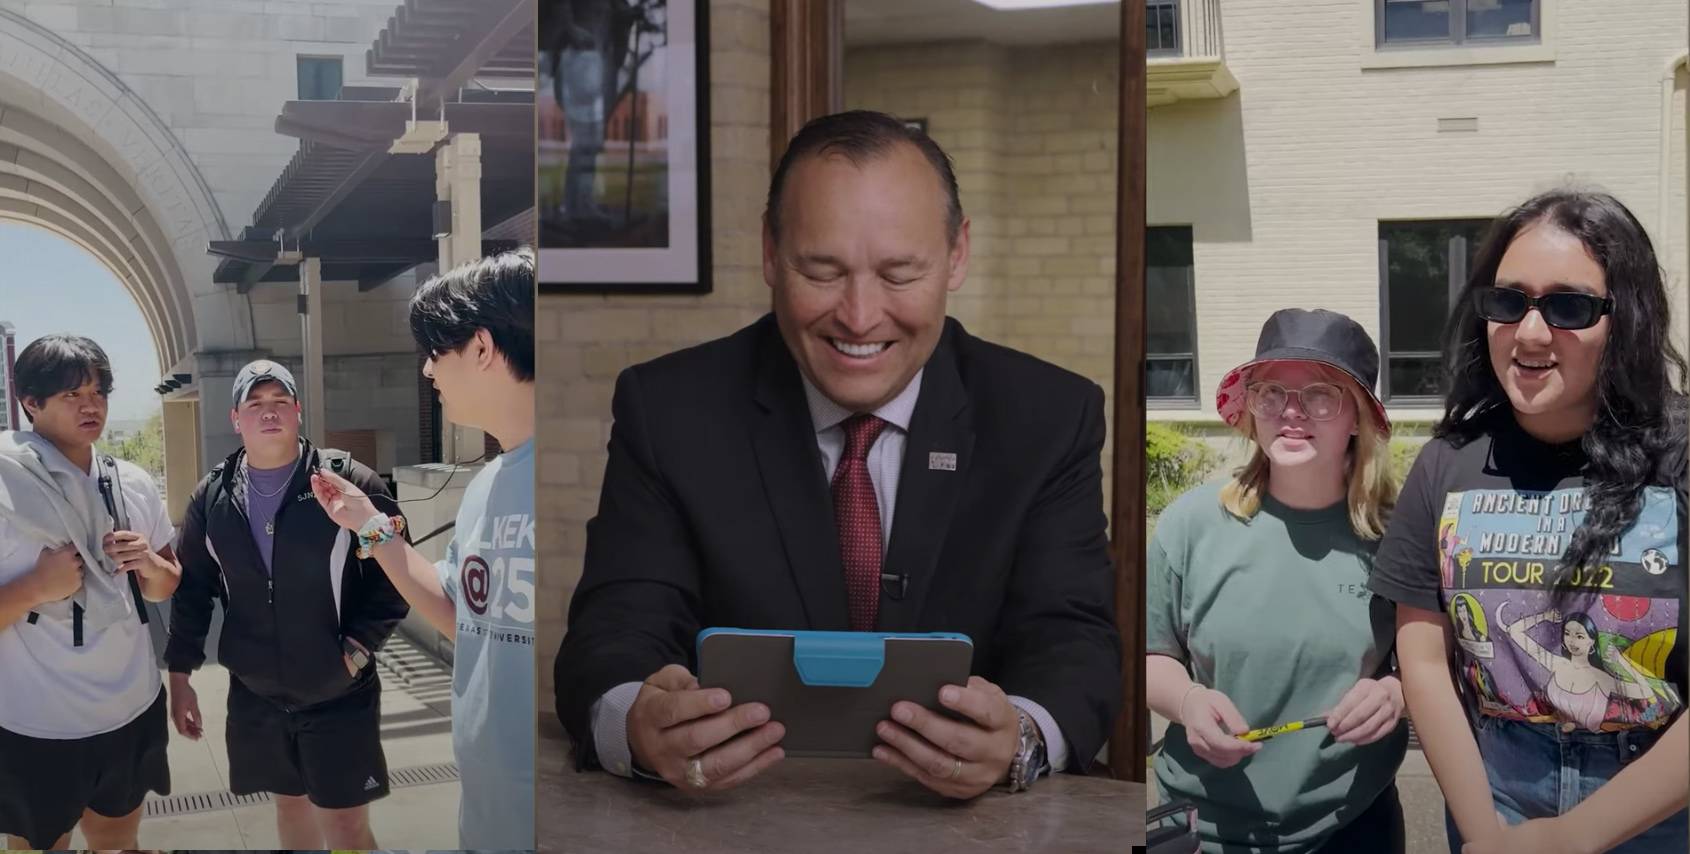 composite photo of man looking at phone and two photos of people being interviewed